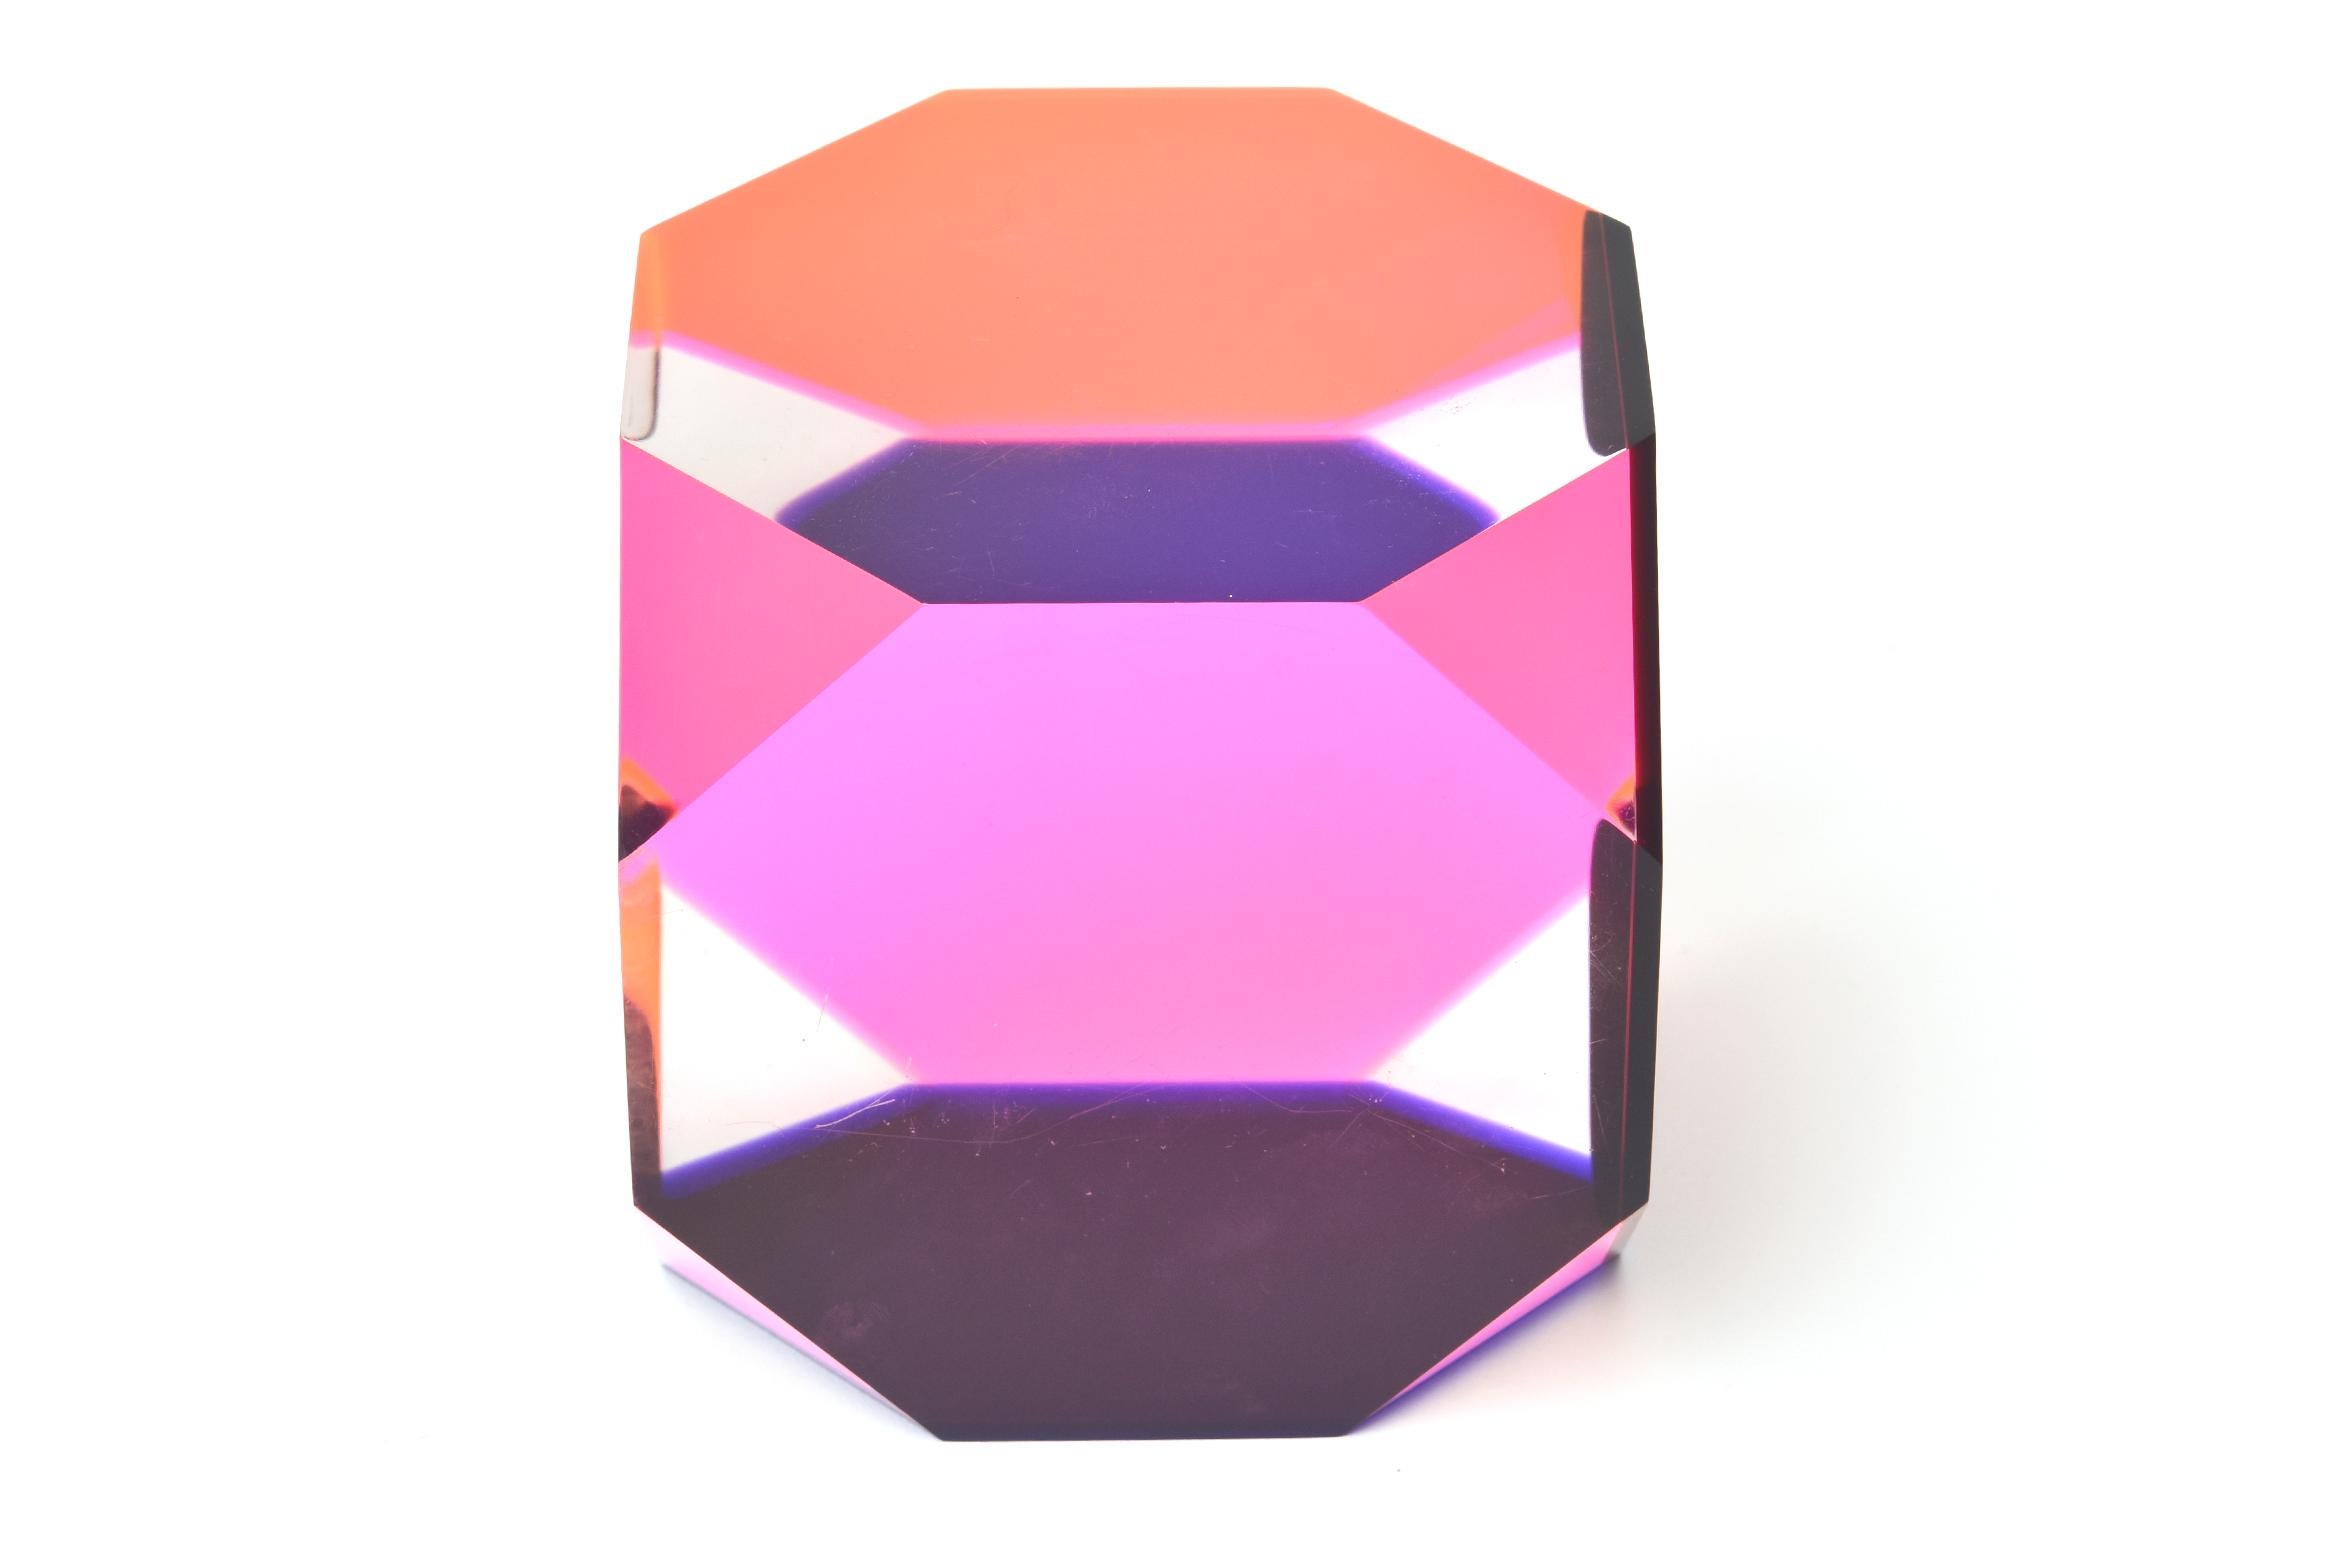 Modern Vasa Mihich Octagonal Lucite Cube Sculpture and Desk Accessory